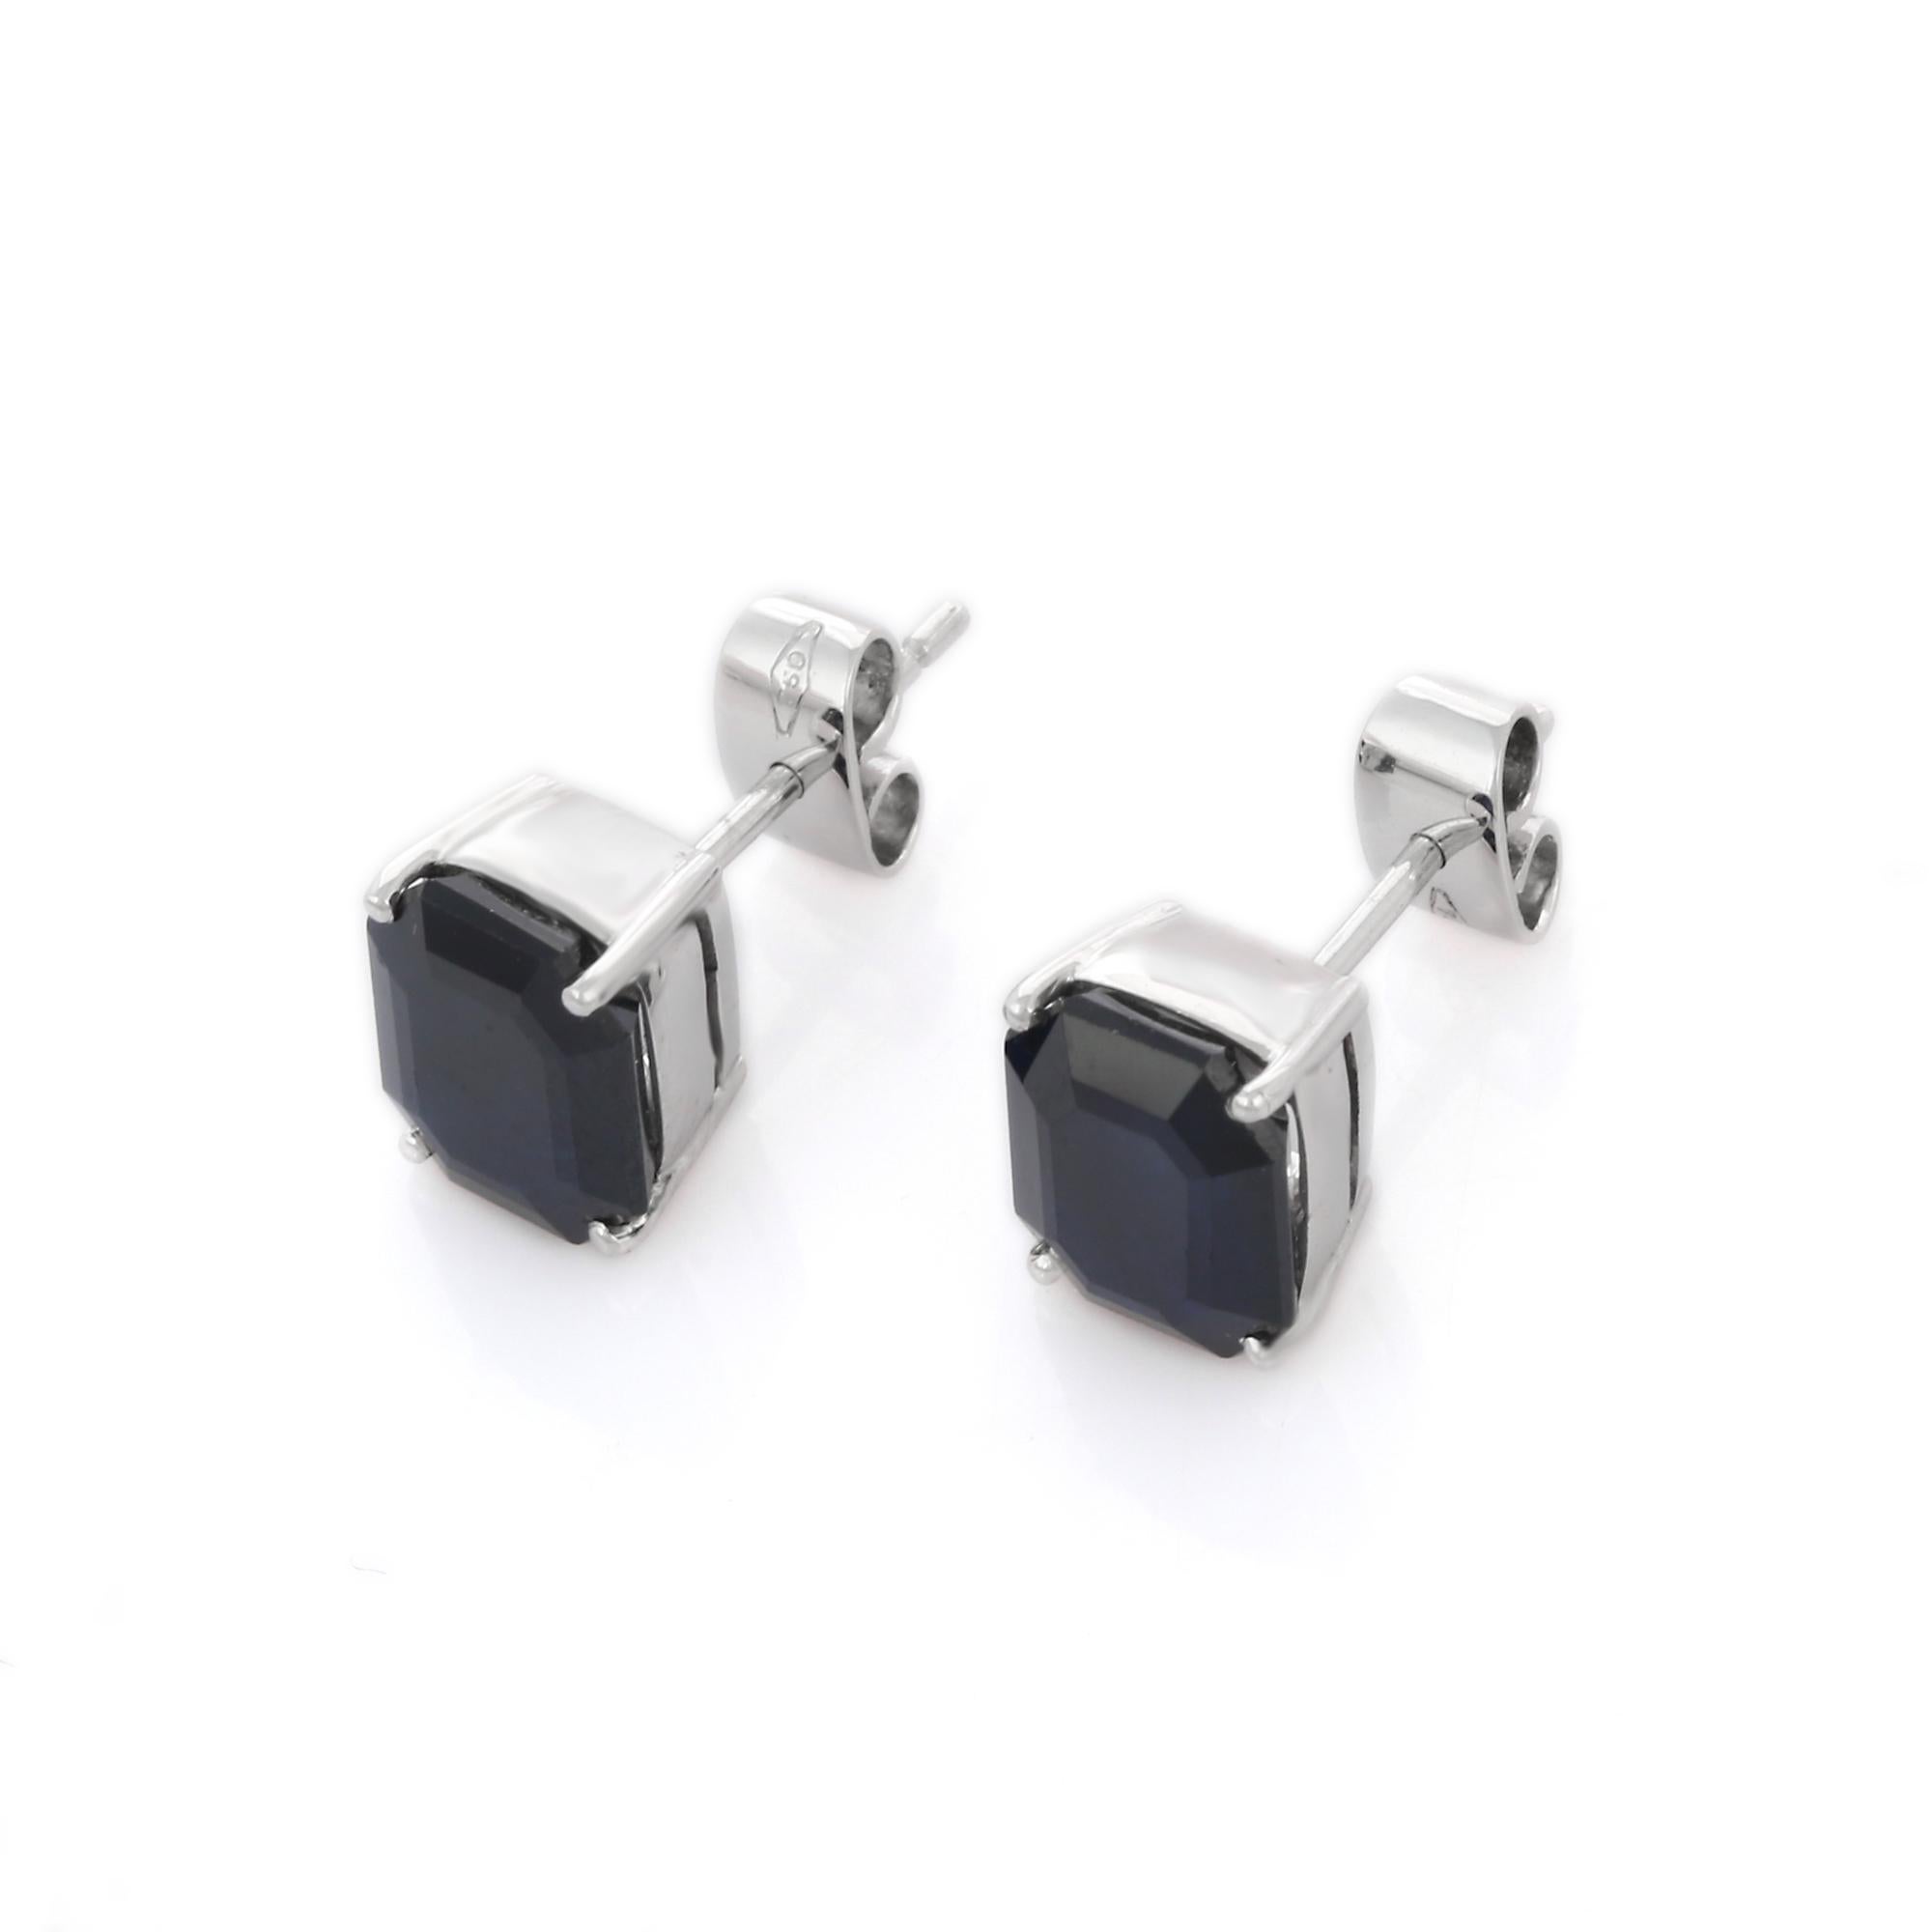 Studs create a subtle beauty while showcasing the colors of the natural precious gemstones making a statement.
Octagon cut blue sapphire studs in 18K gold. Embrace your look with these stunning pair of earrings suitable for any occasion to complete